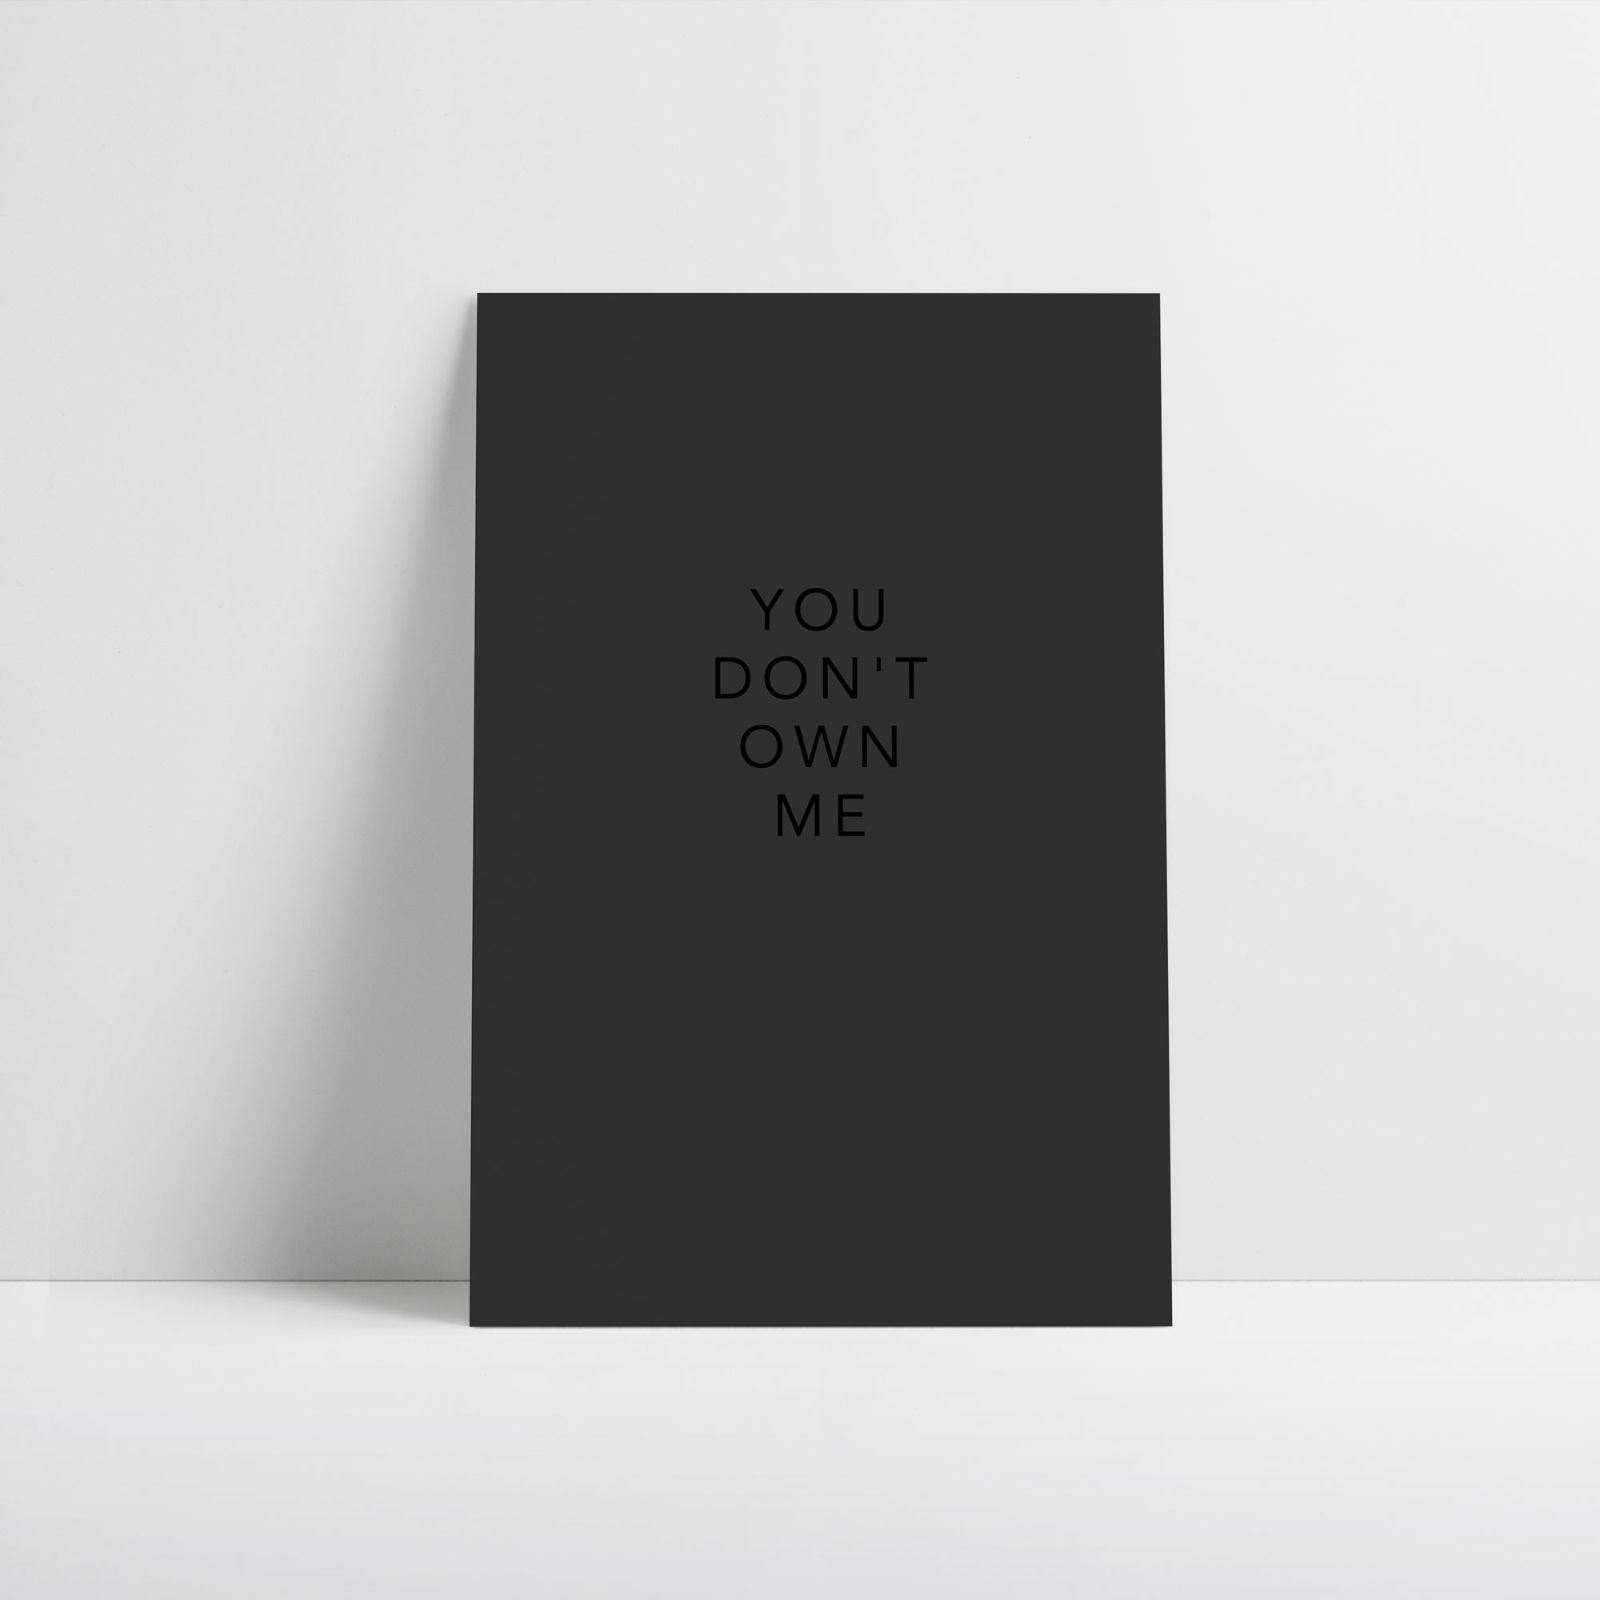 You don't own me - typography Design Art Poster Wall Art Prints Interior Decoration